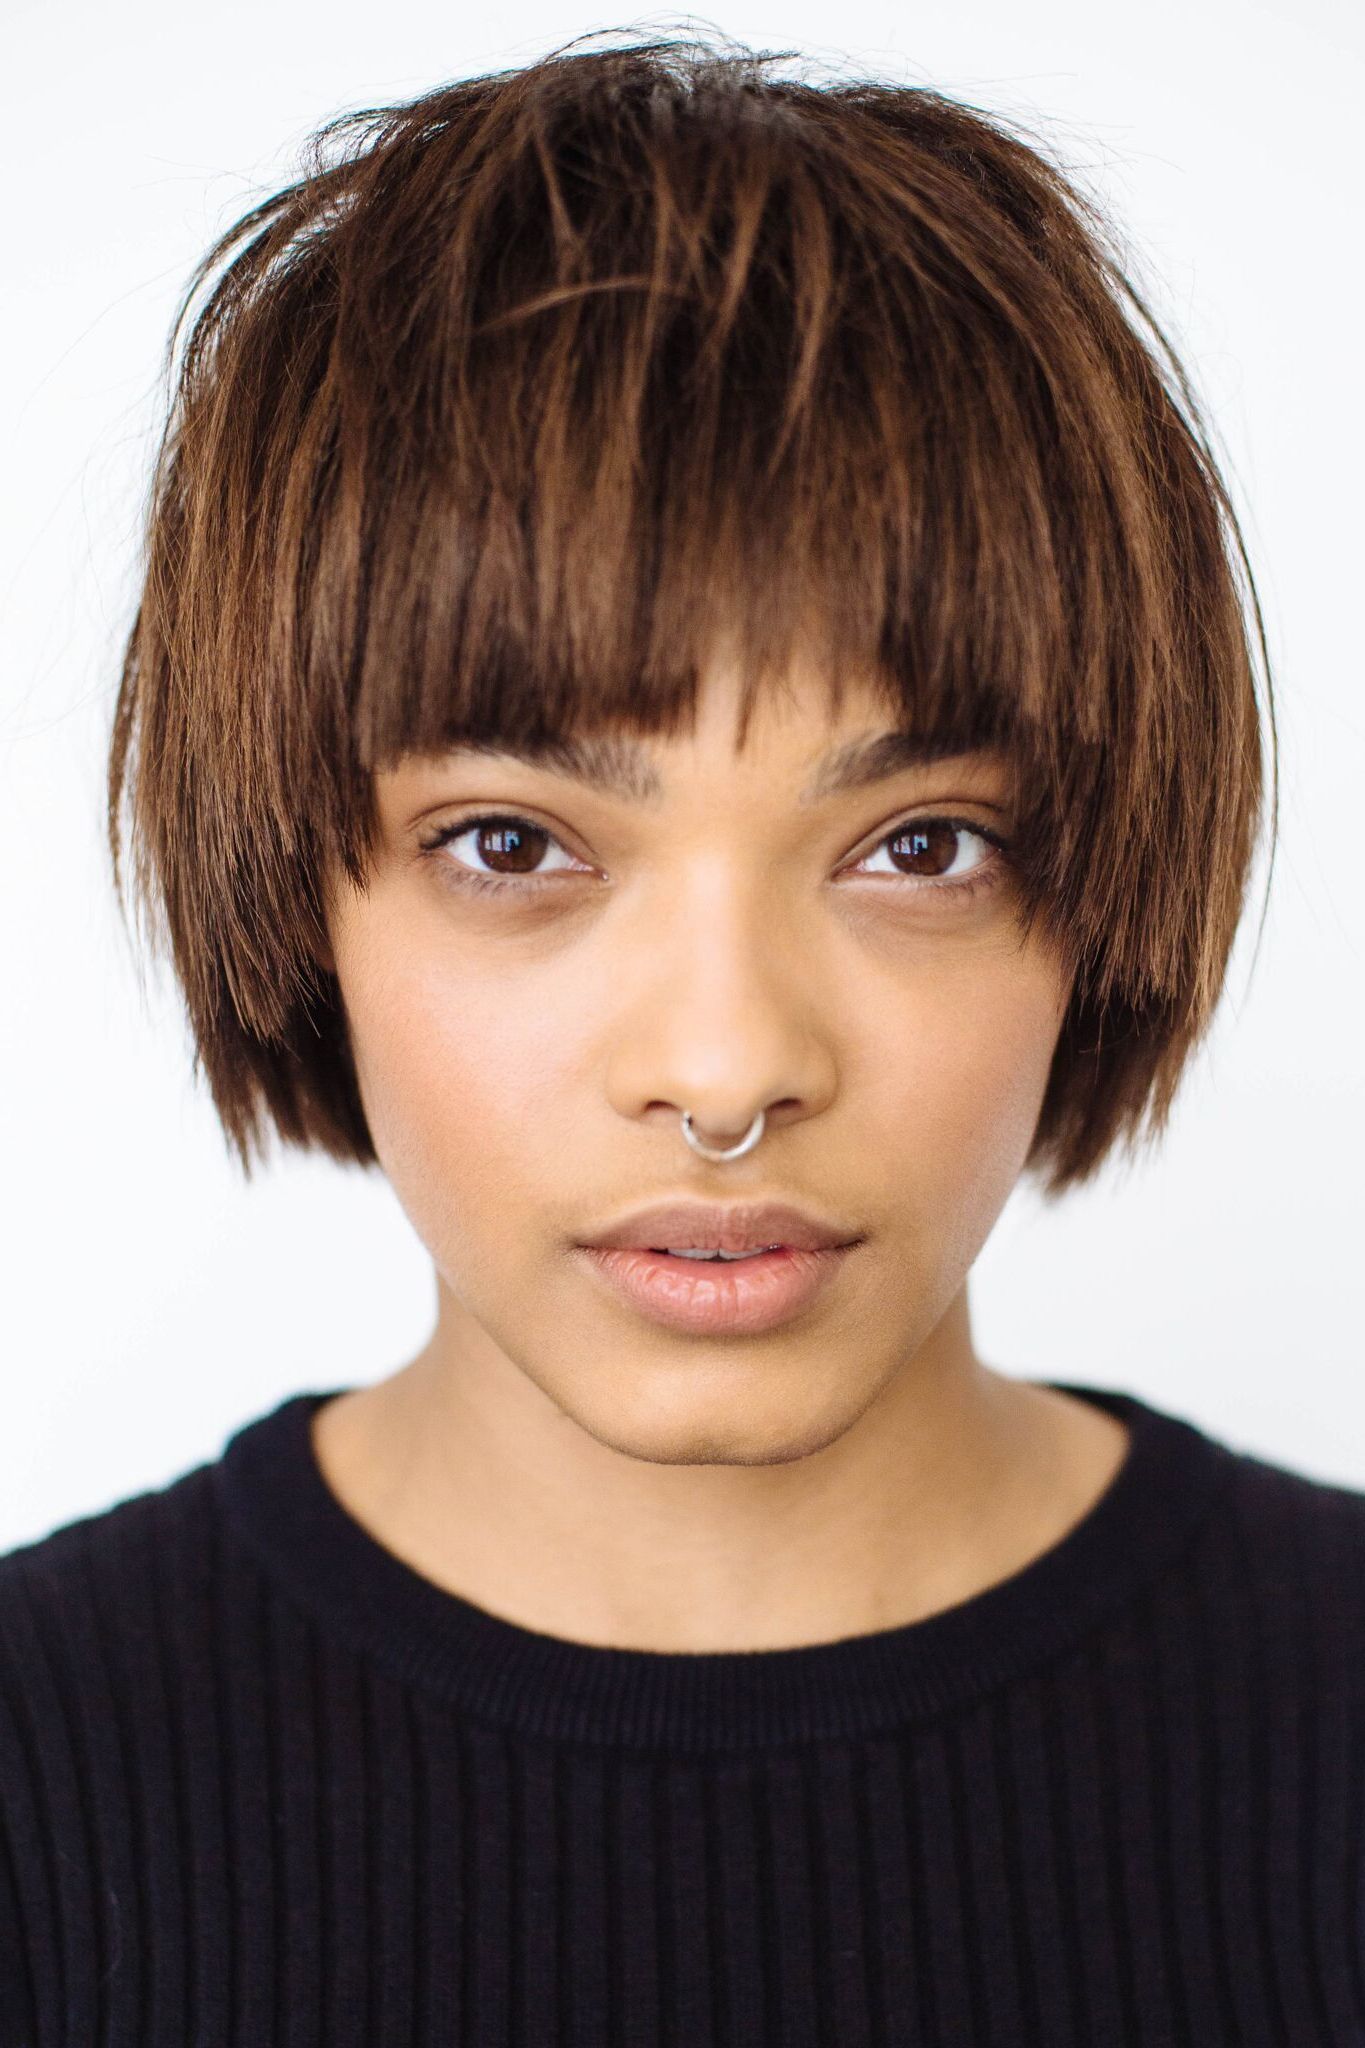 Hair Ideas Trends 2018 – Accessories Shag Blunt Bangs Throughout Elongated Choppy Pixie Haircuts With Tapered Back (Gallery 20 of 20)